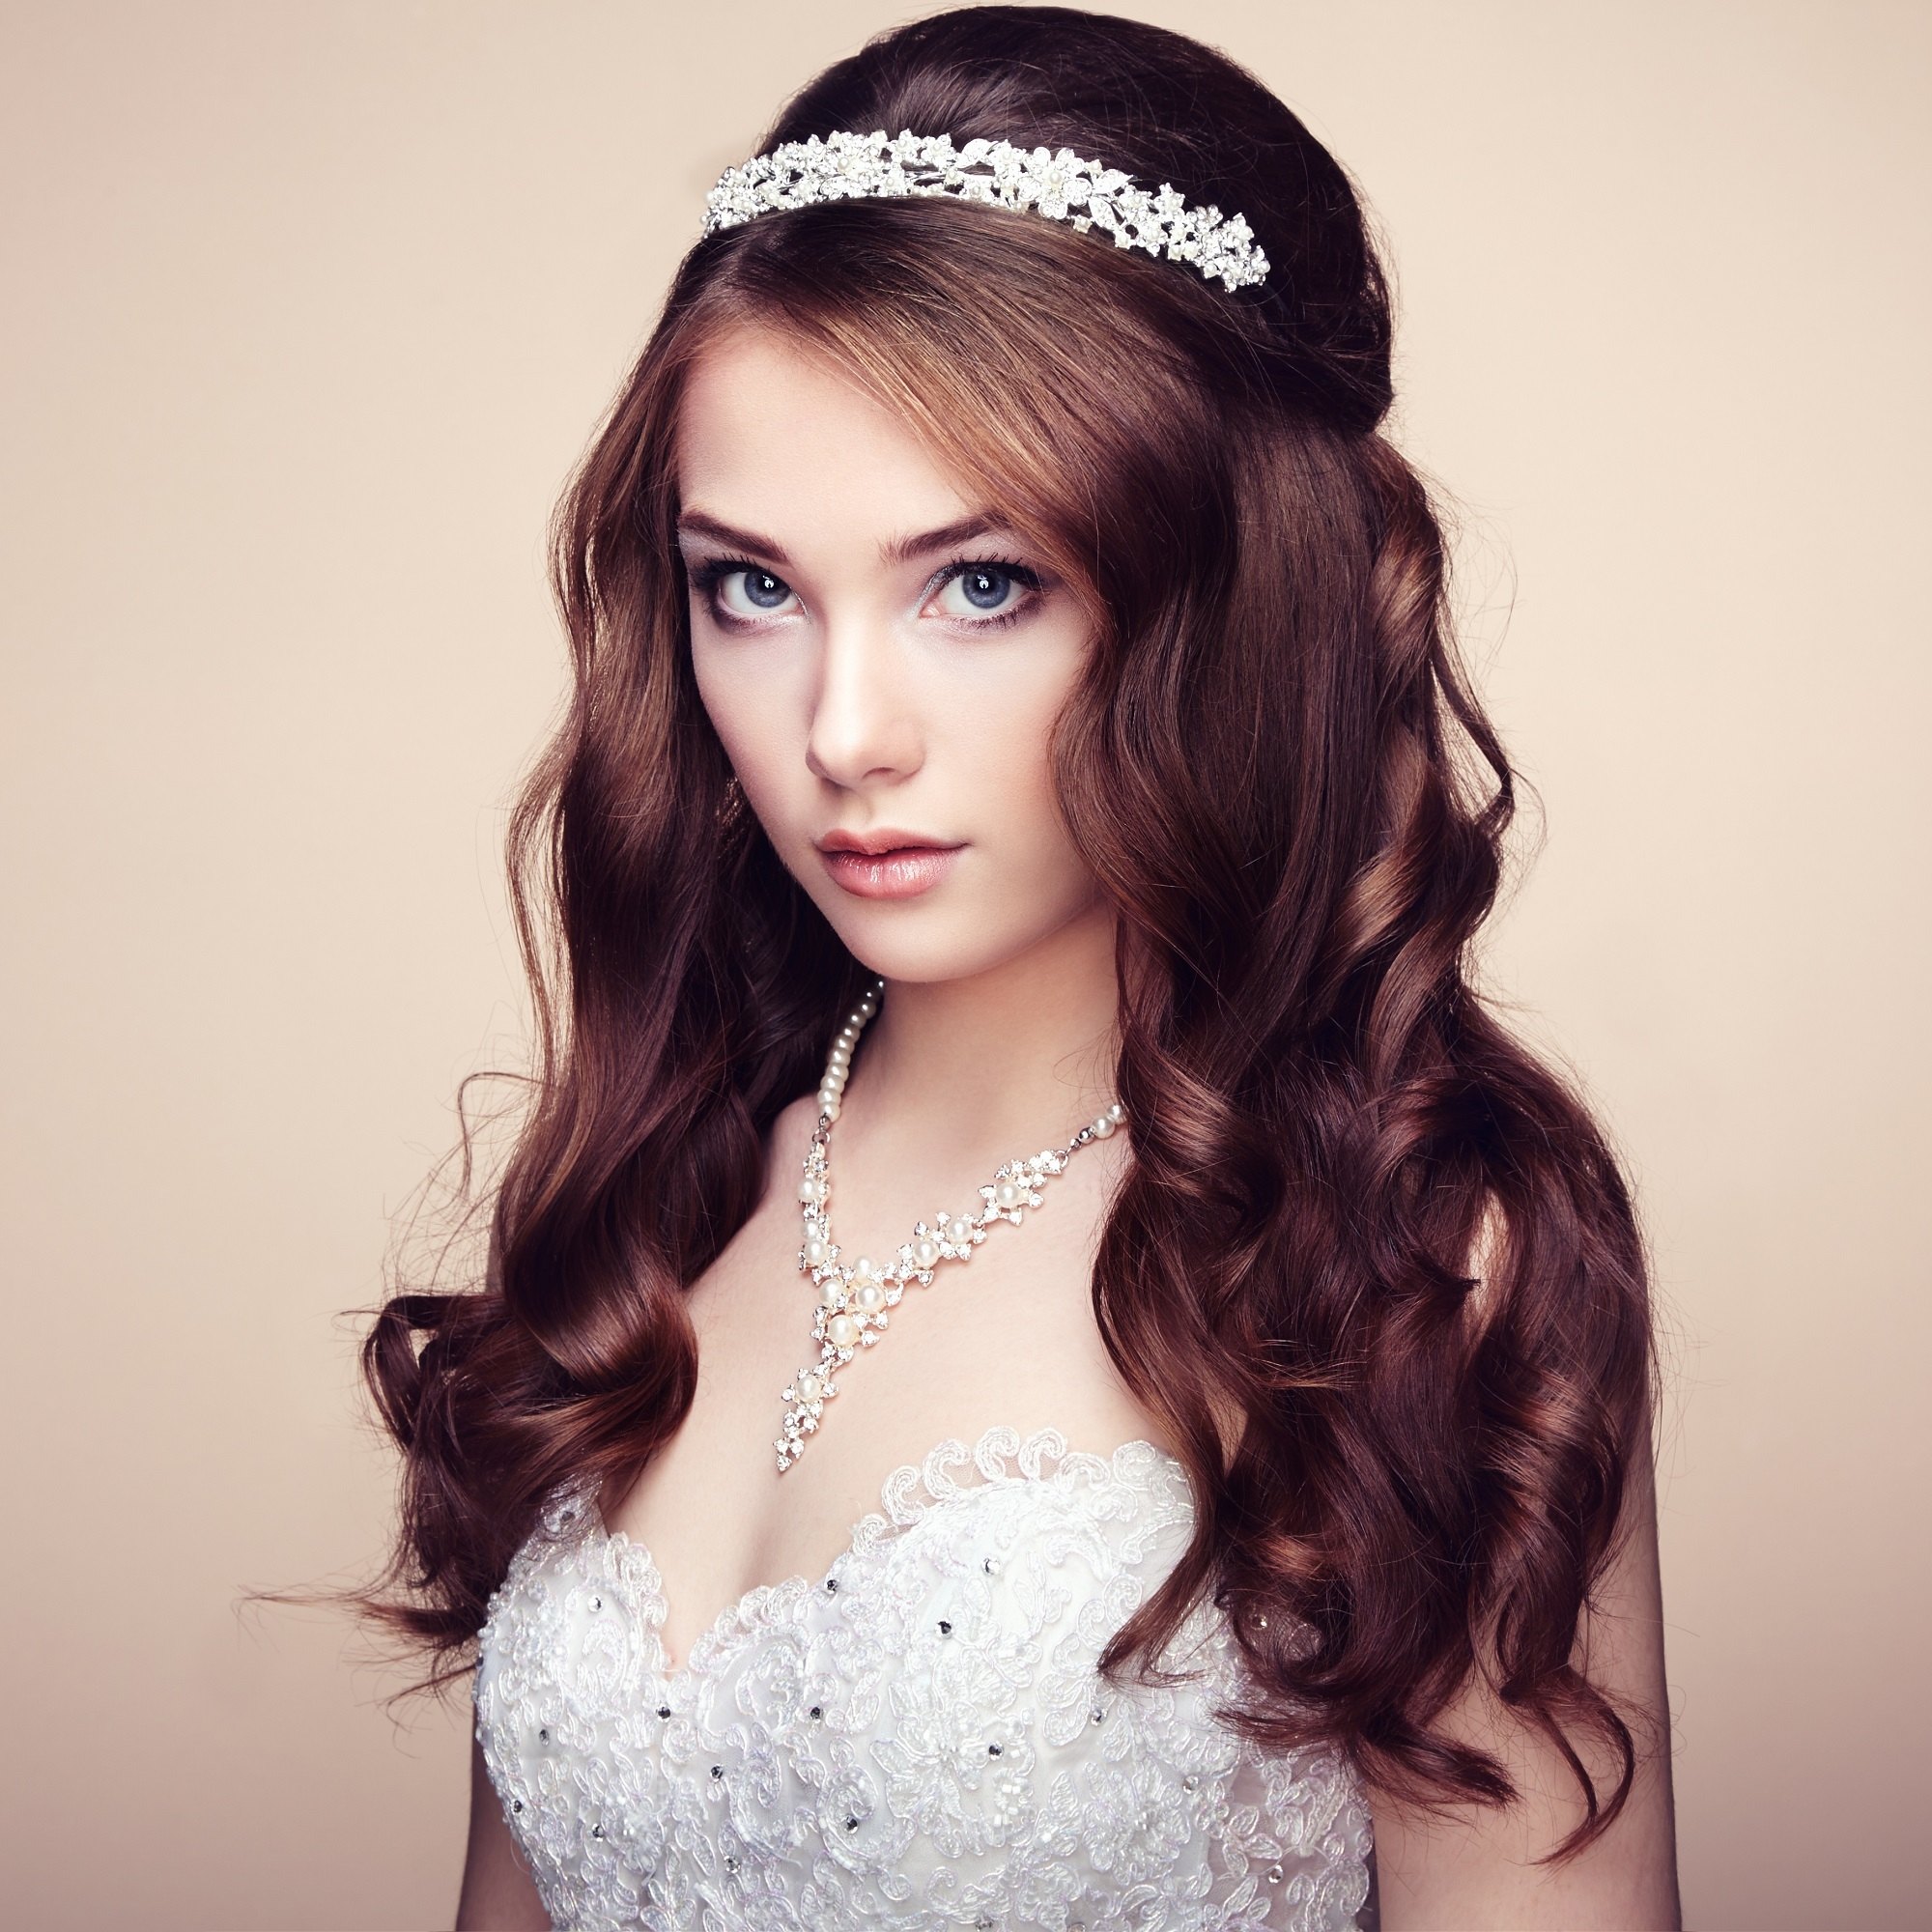 How To Choose A Wedding Hairstyle: Hair Types, Face Shapes & More